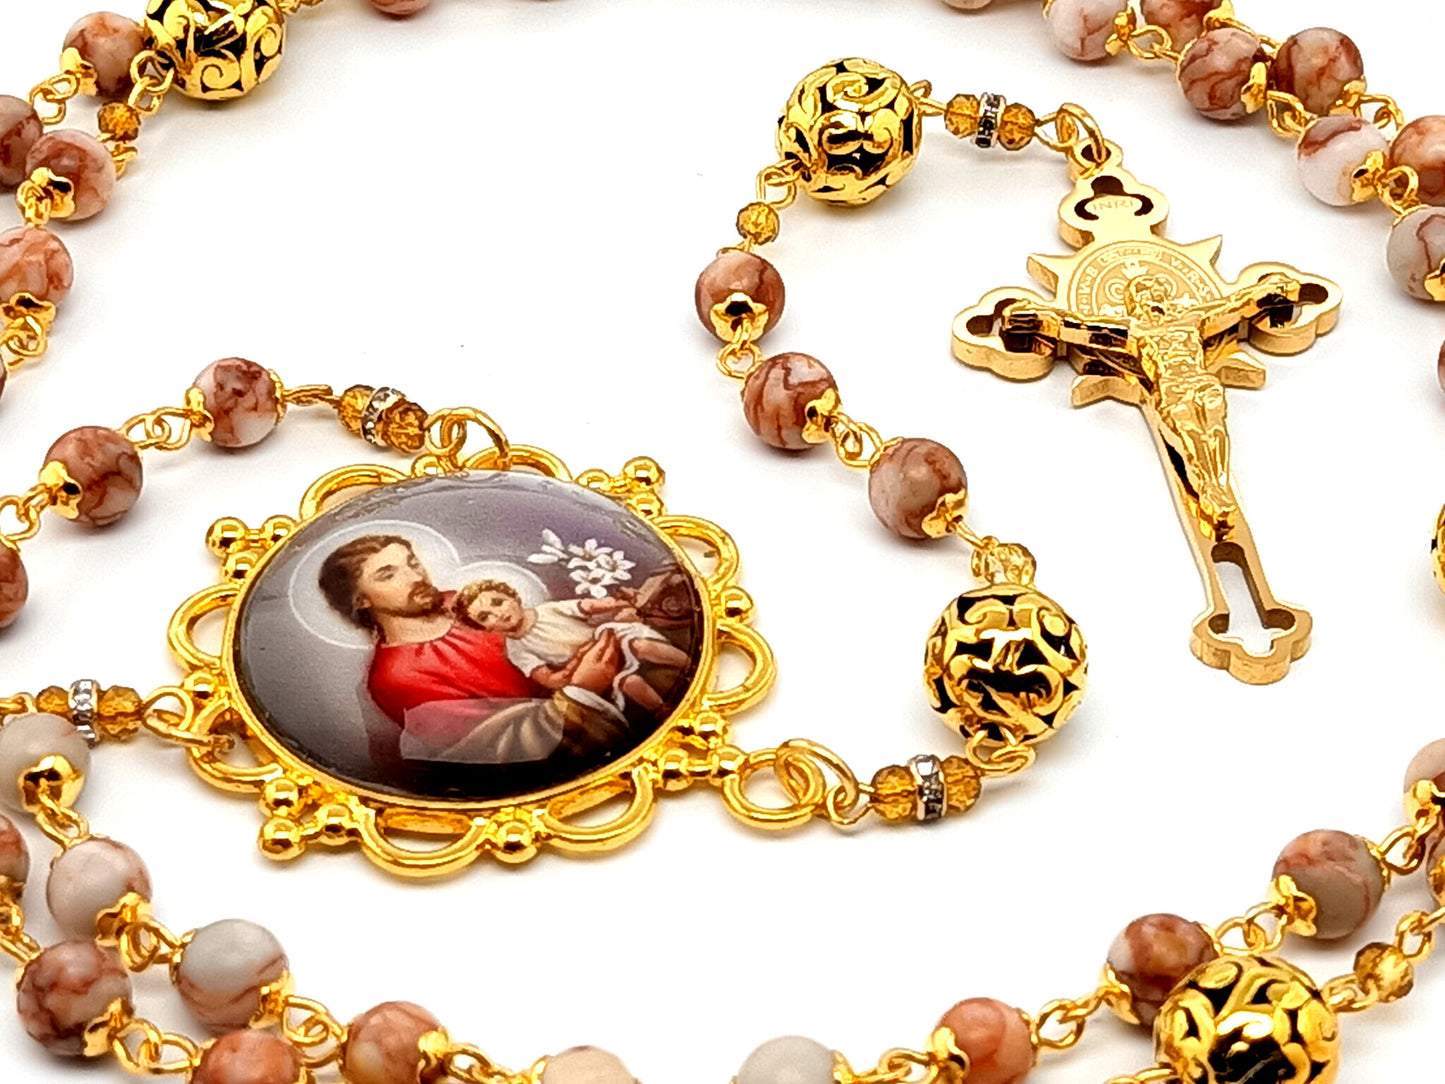 Saint Joseph unique rosary beads with dragons vein gemstone beads and gold engraved Saint Benedict crucifix.